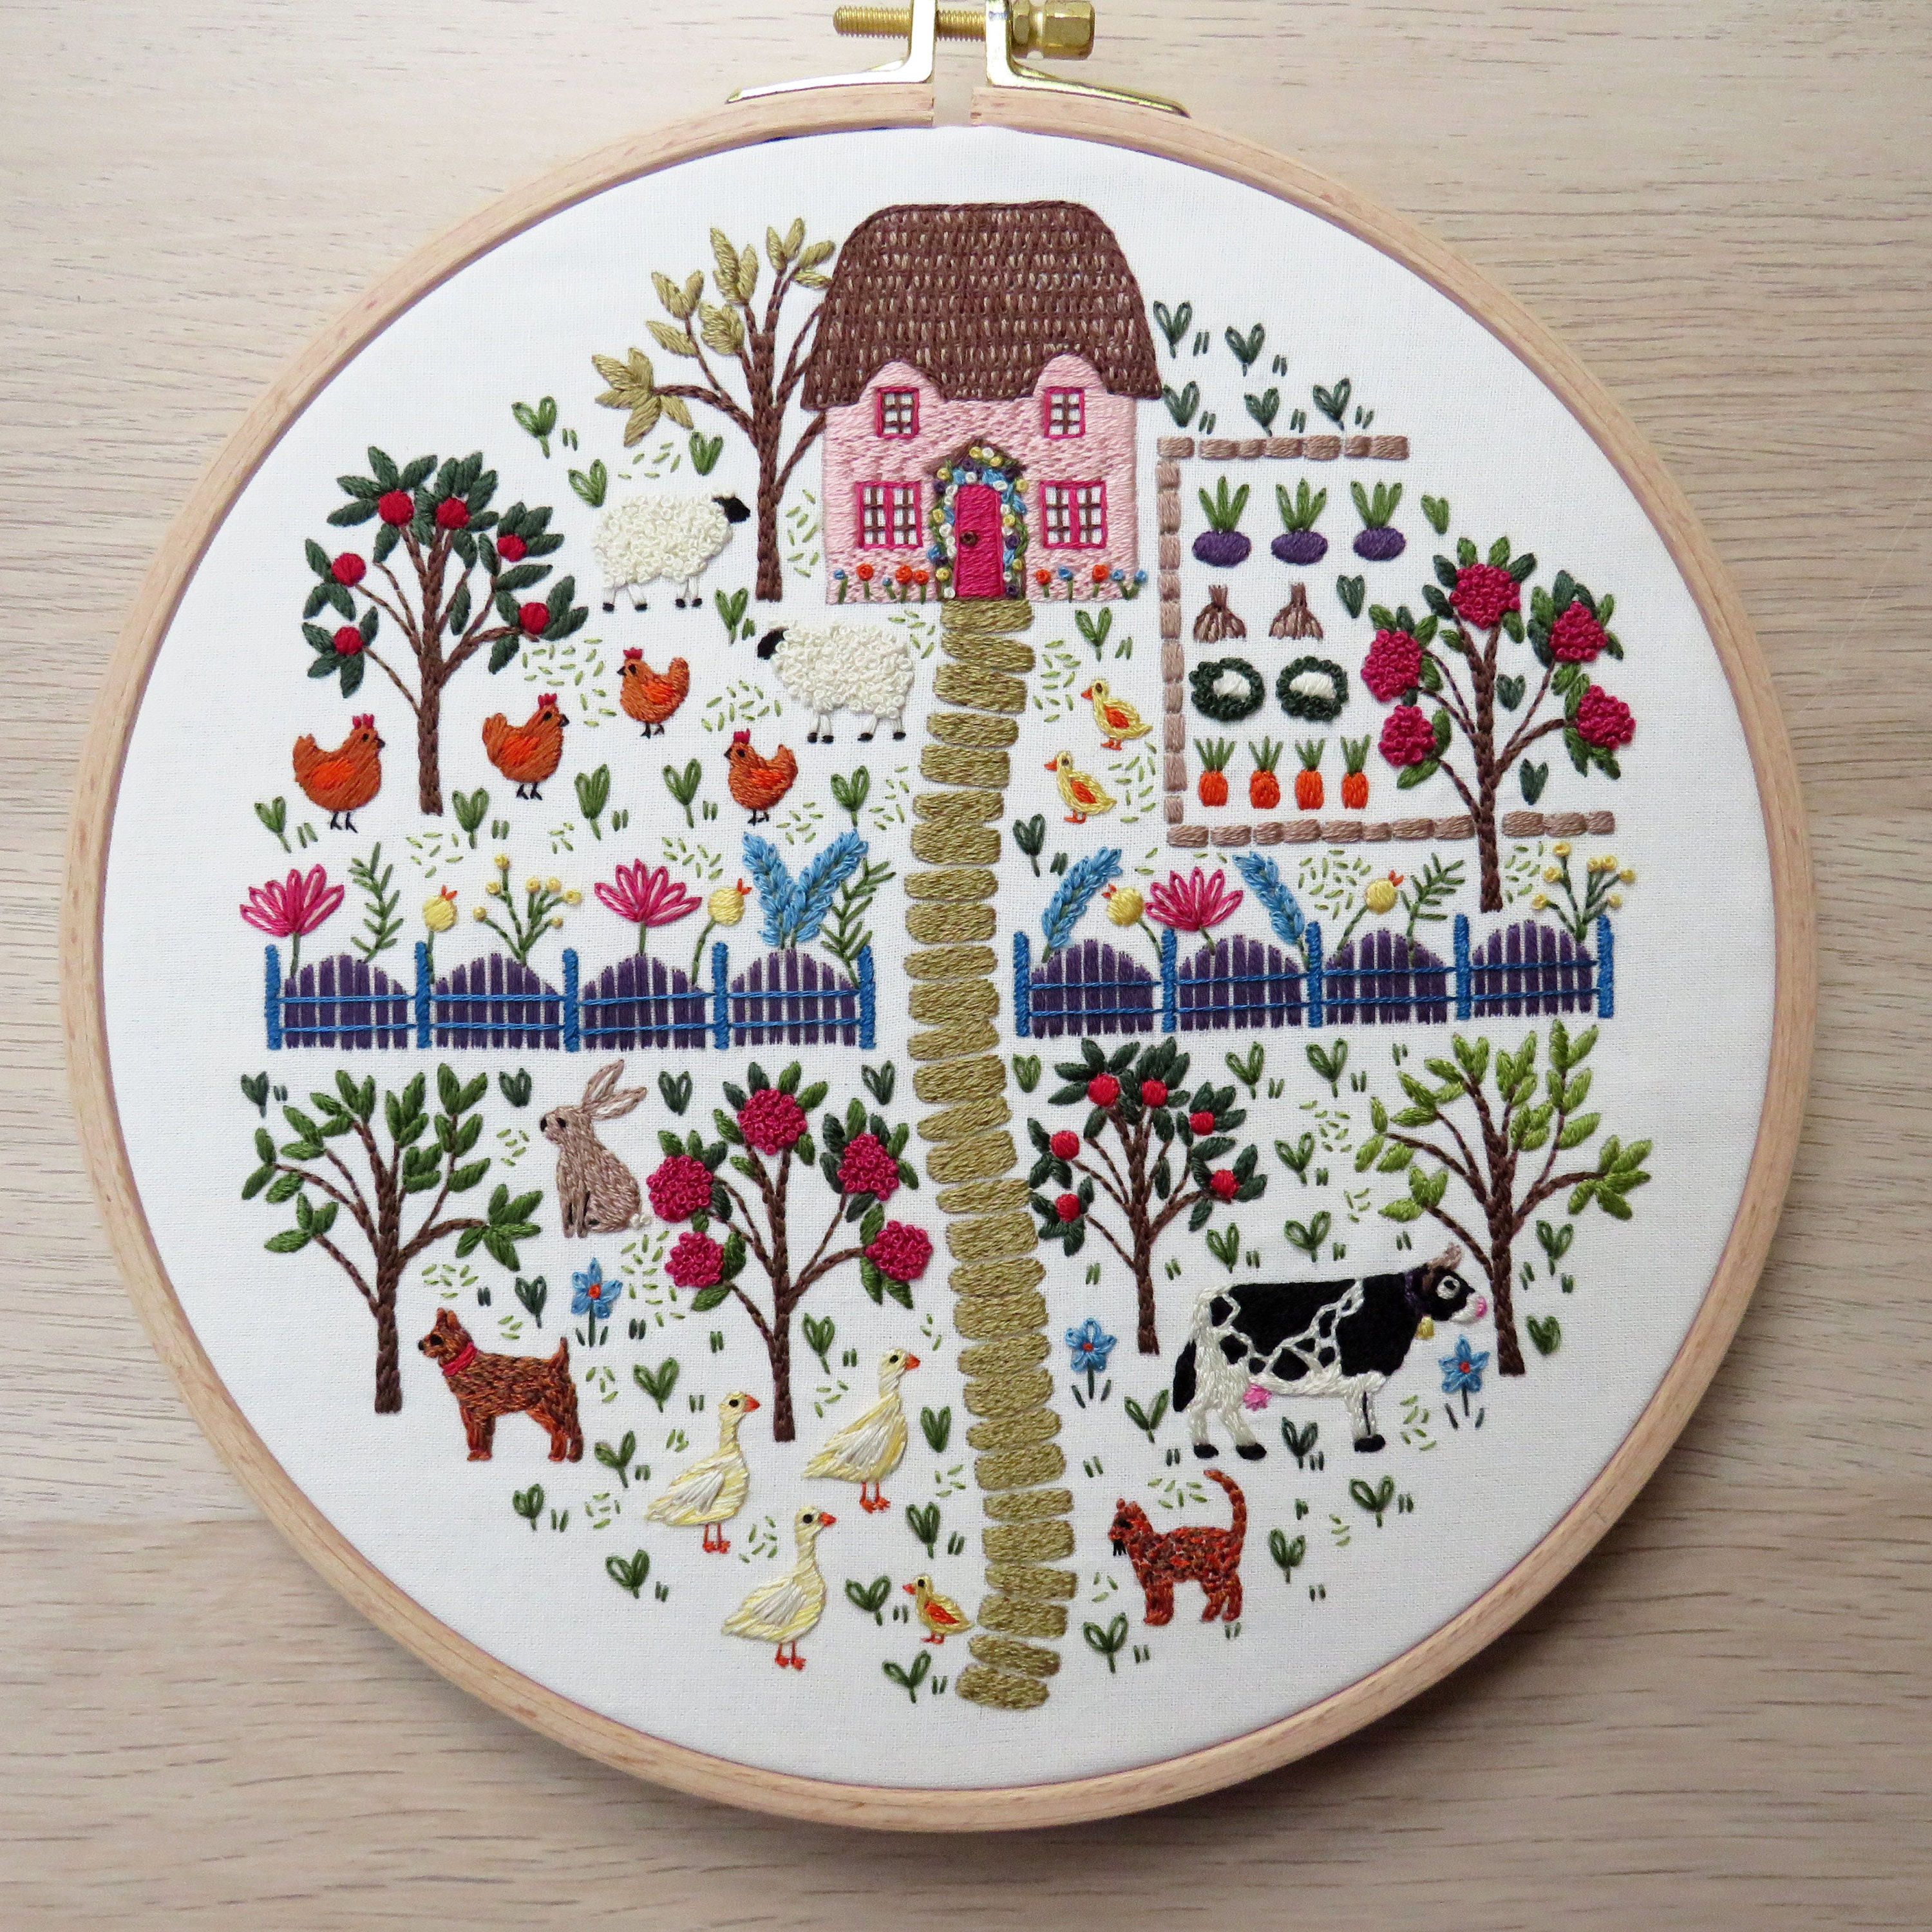 Hand Embroidered Book Shelf Design 7 or 8 Inch Hoop -  Canada